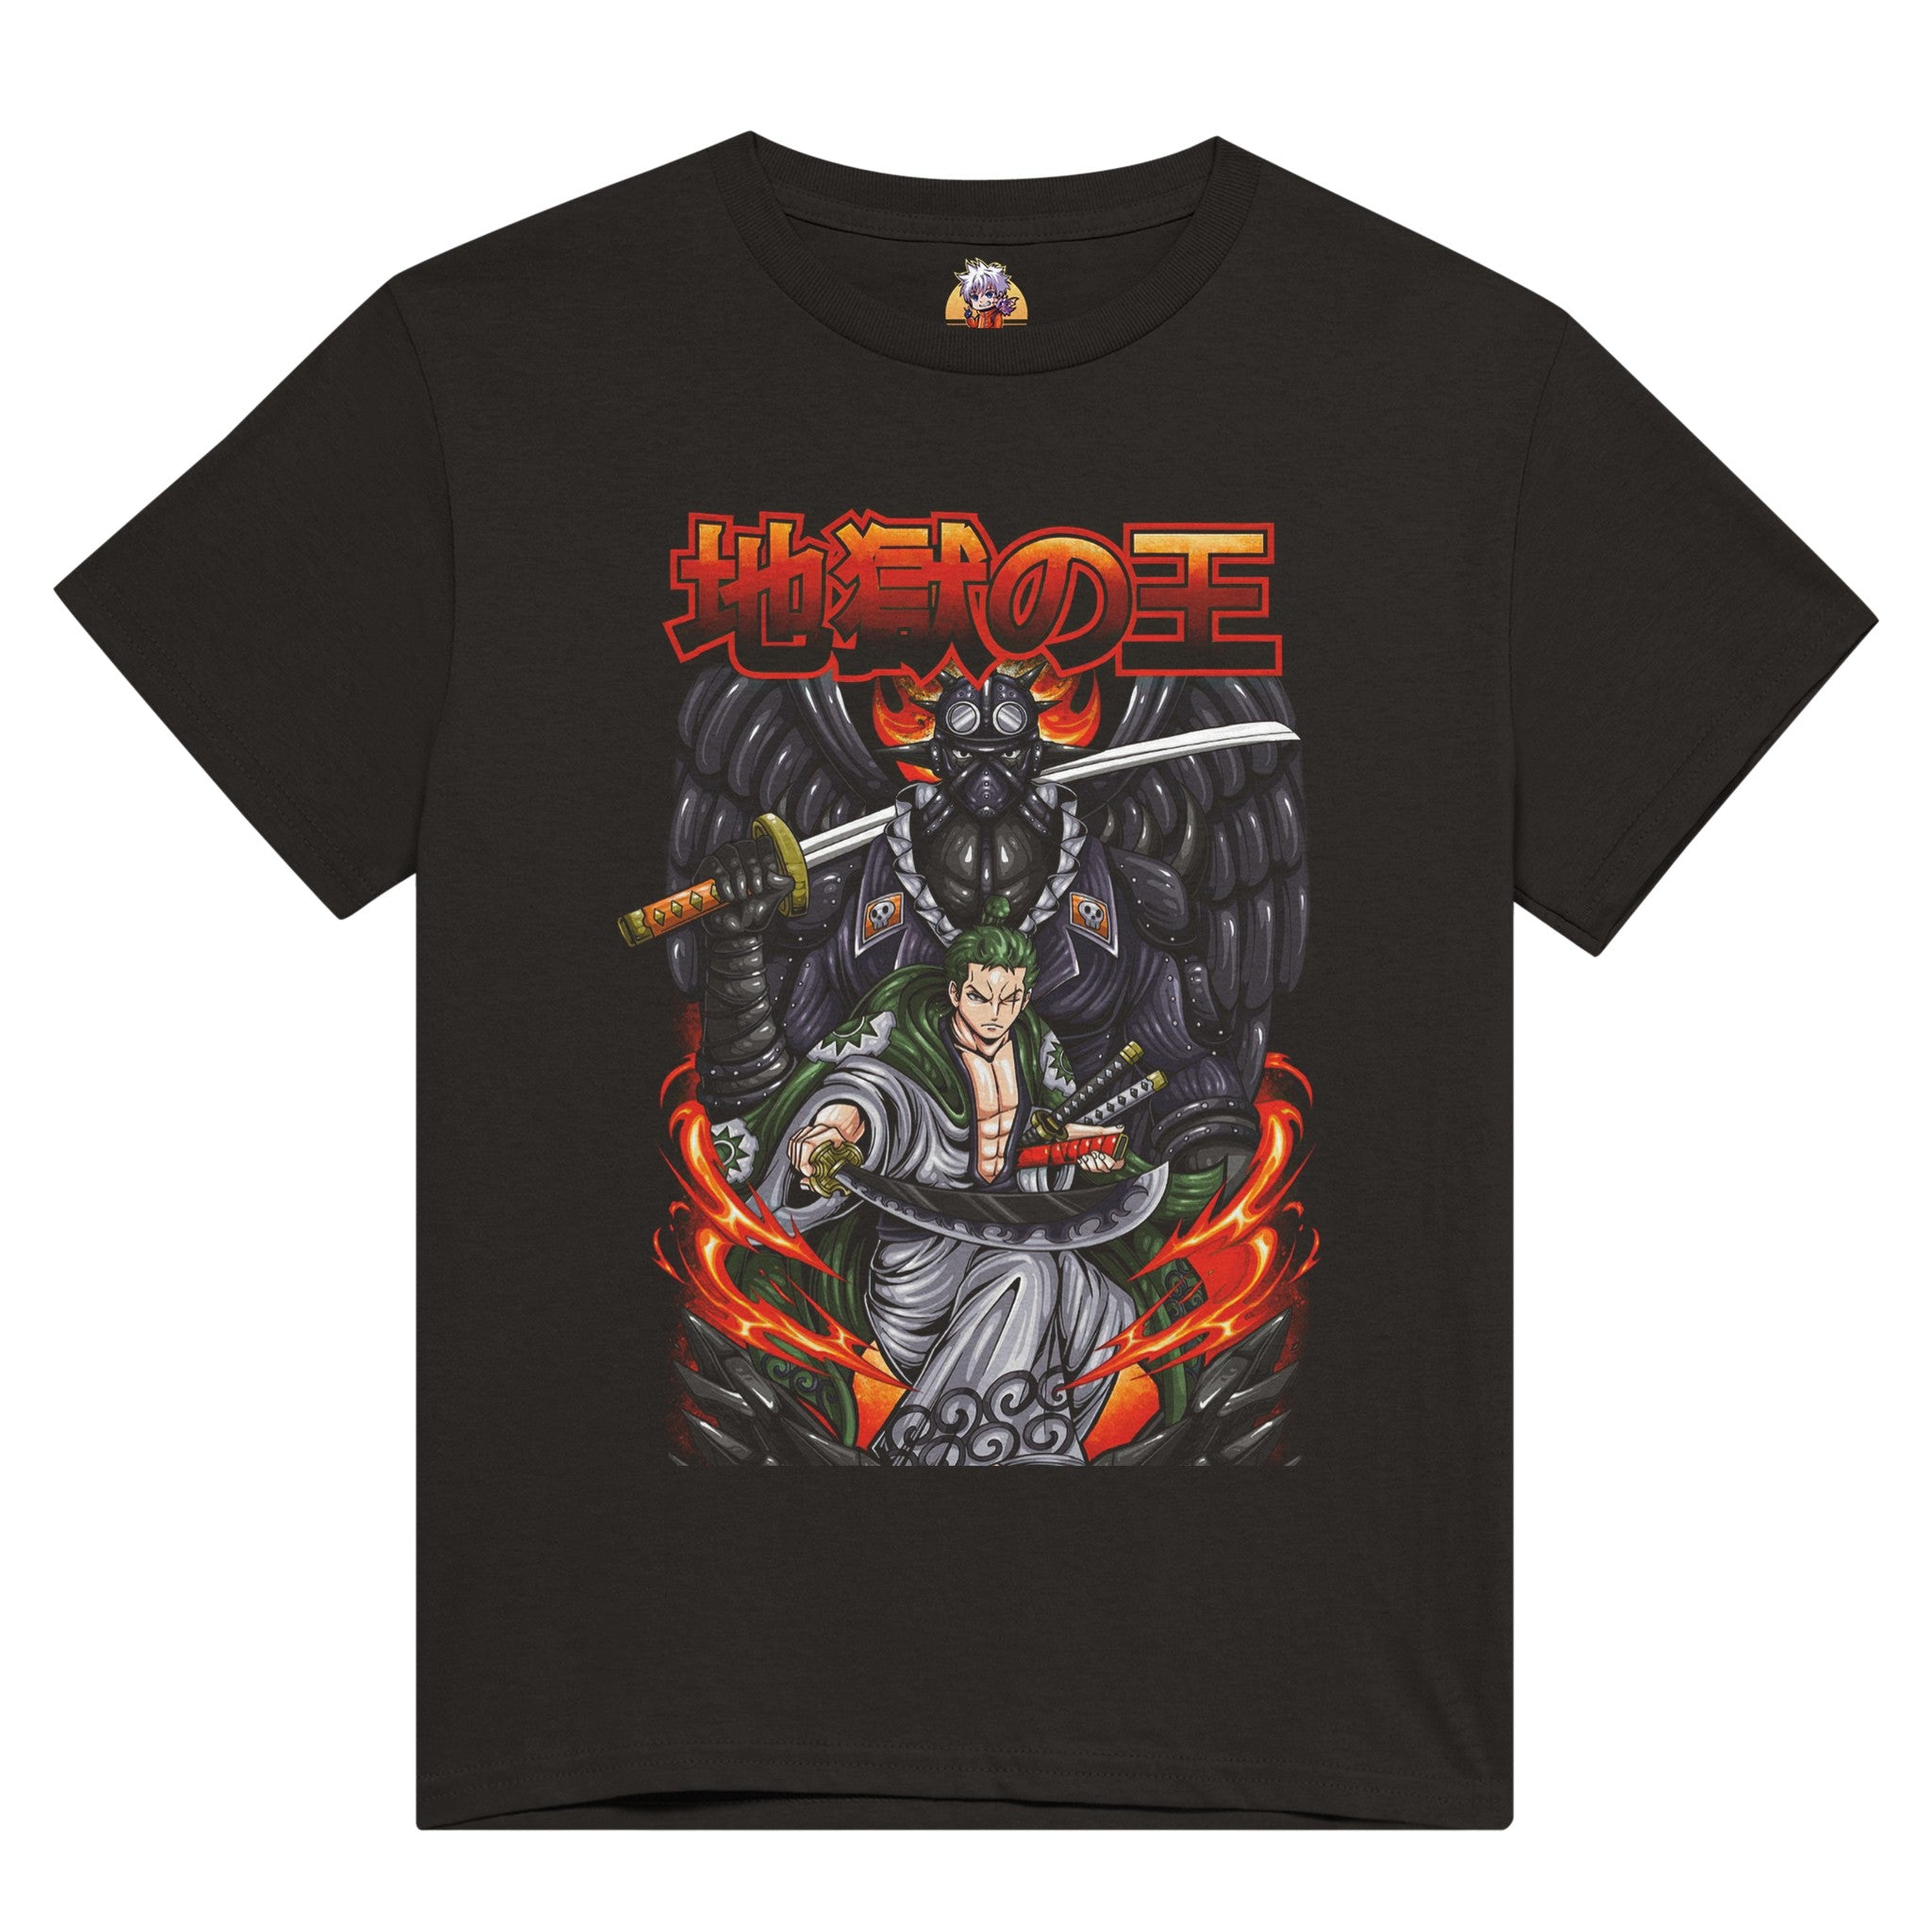 shop and buy one piece zoro anime clothing t-shirt